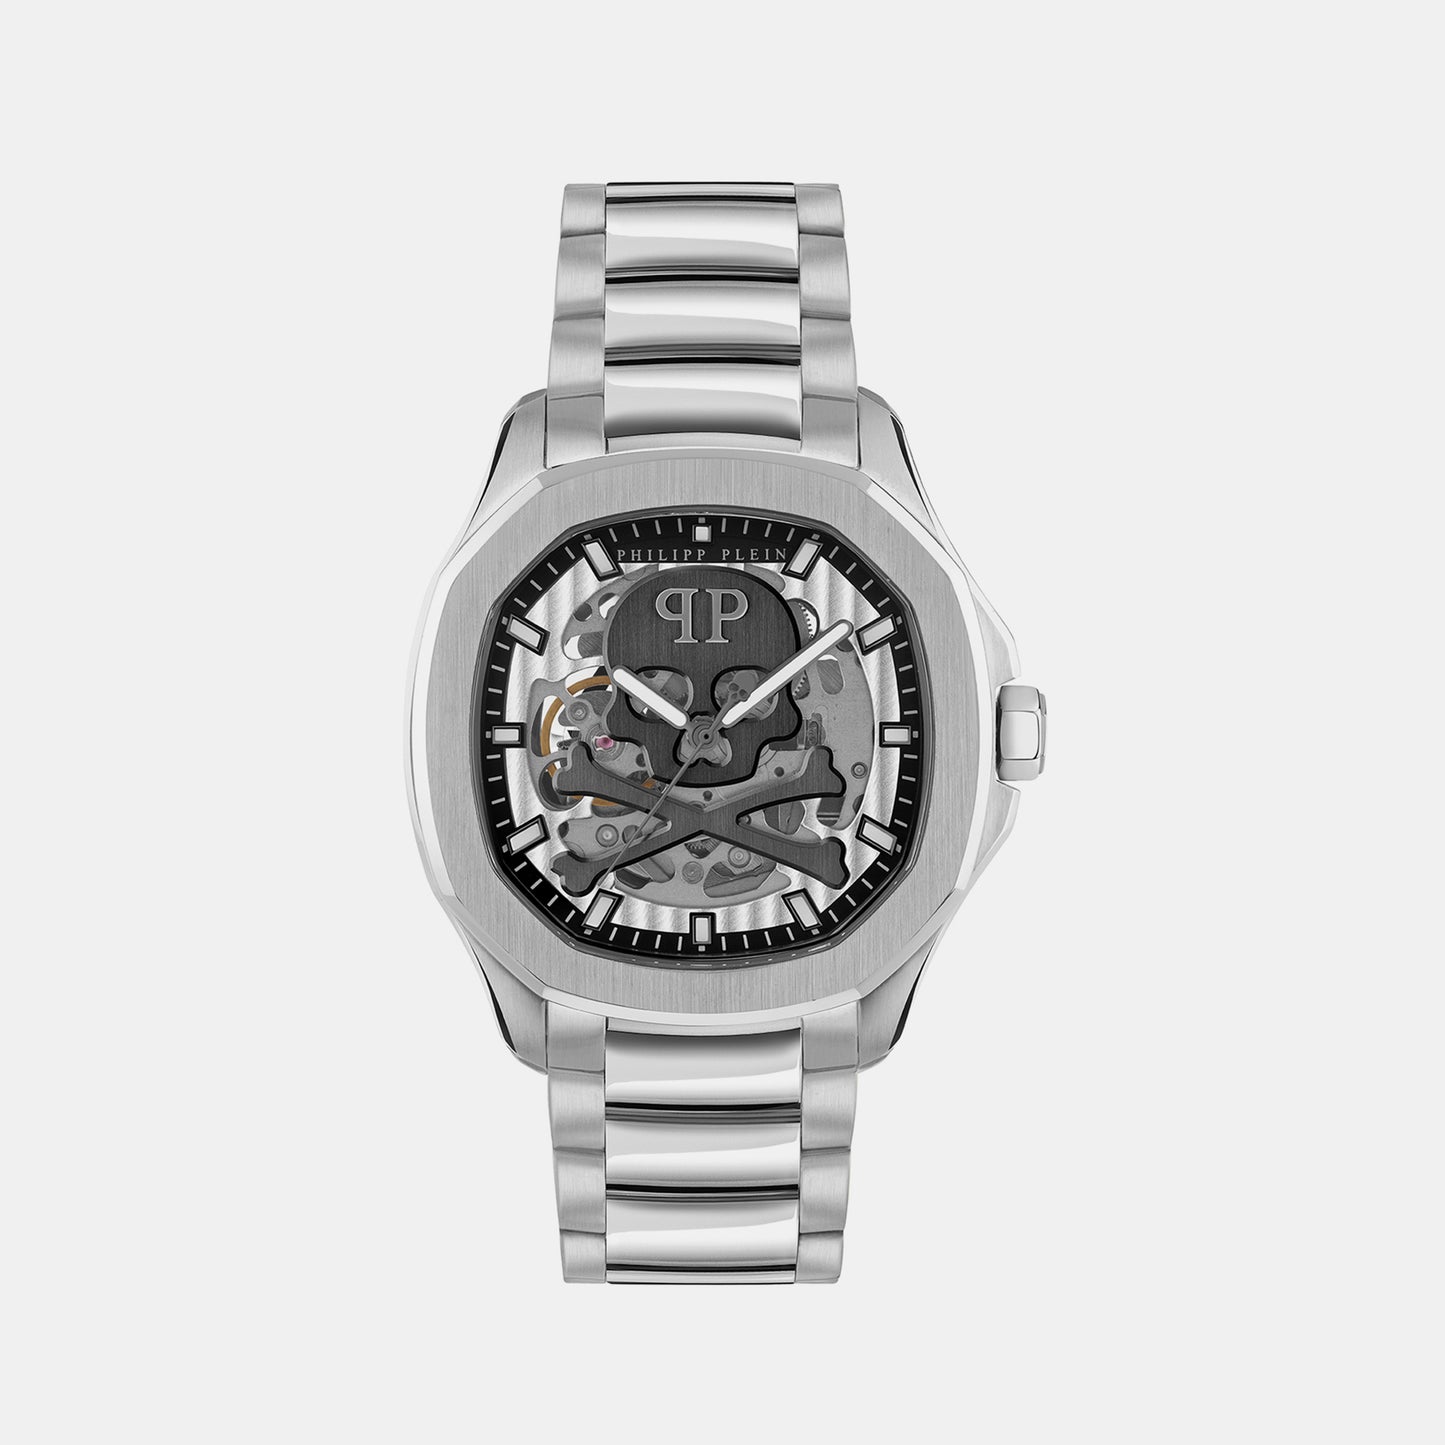 Plein Philipp Male Silver Automatic Stainless Steel Watch PWRAA0223